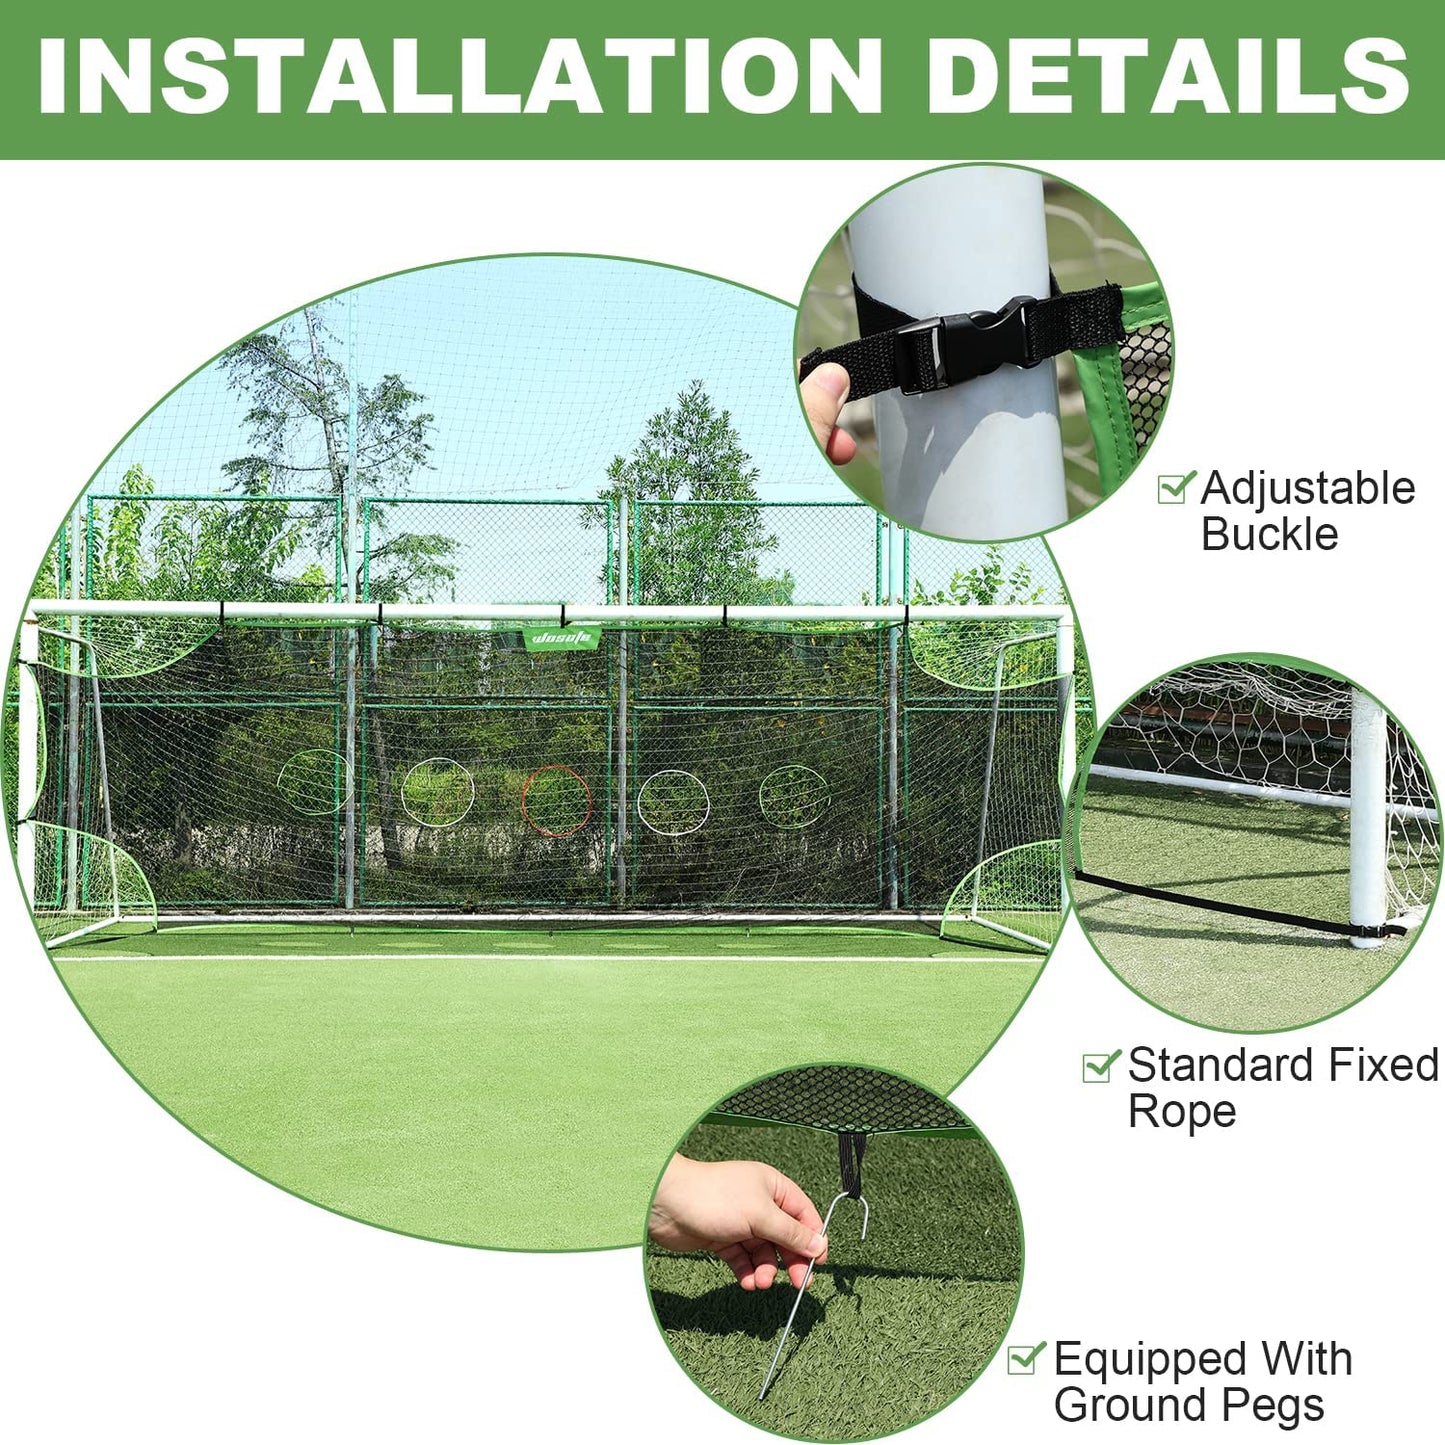 Wosofe Soccer Goal Target Soccer Training Equipment Net with Scoring Zones Improve Kick Practice Shooting and Goalshot Accuracy Training